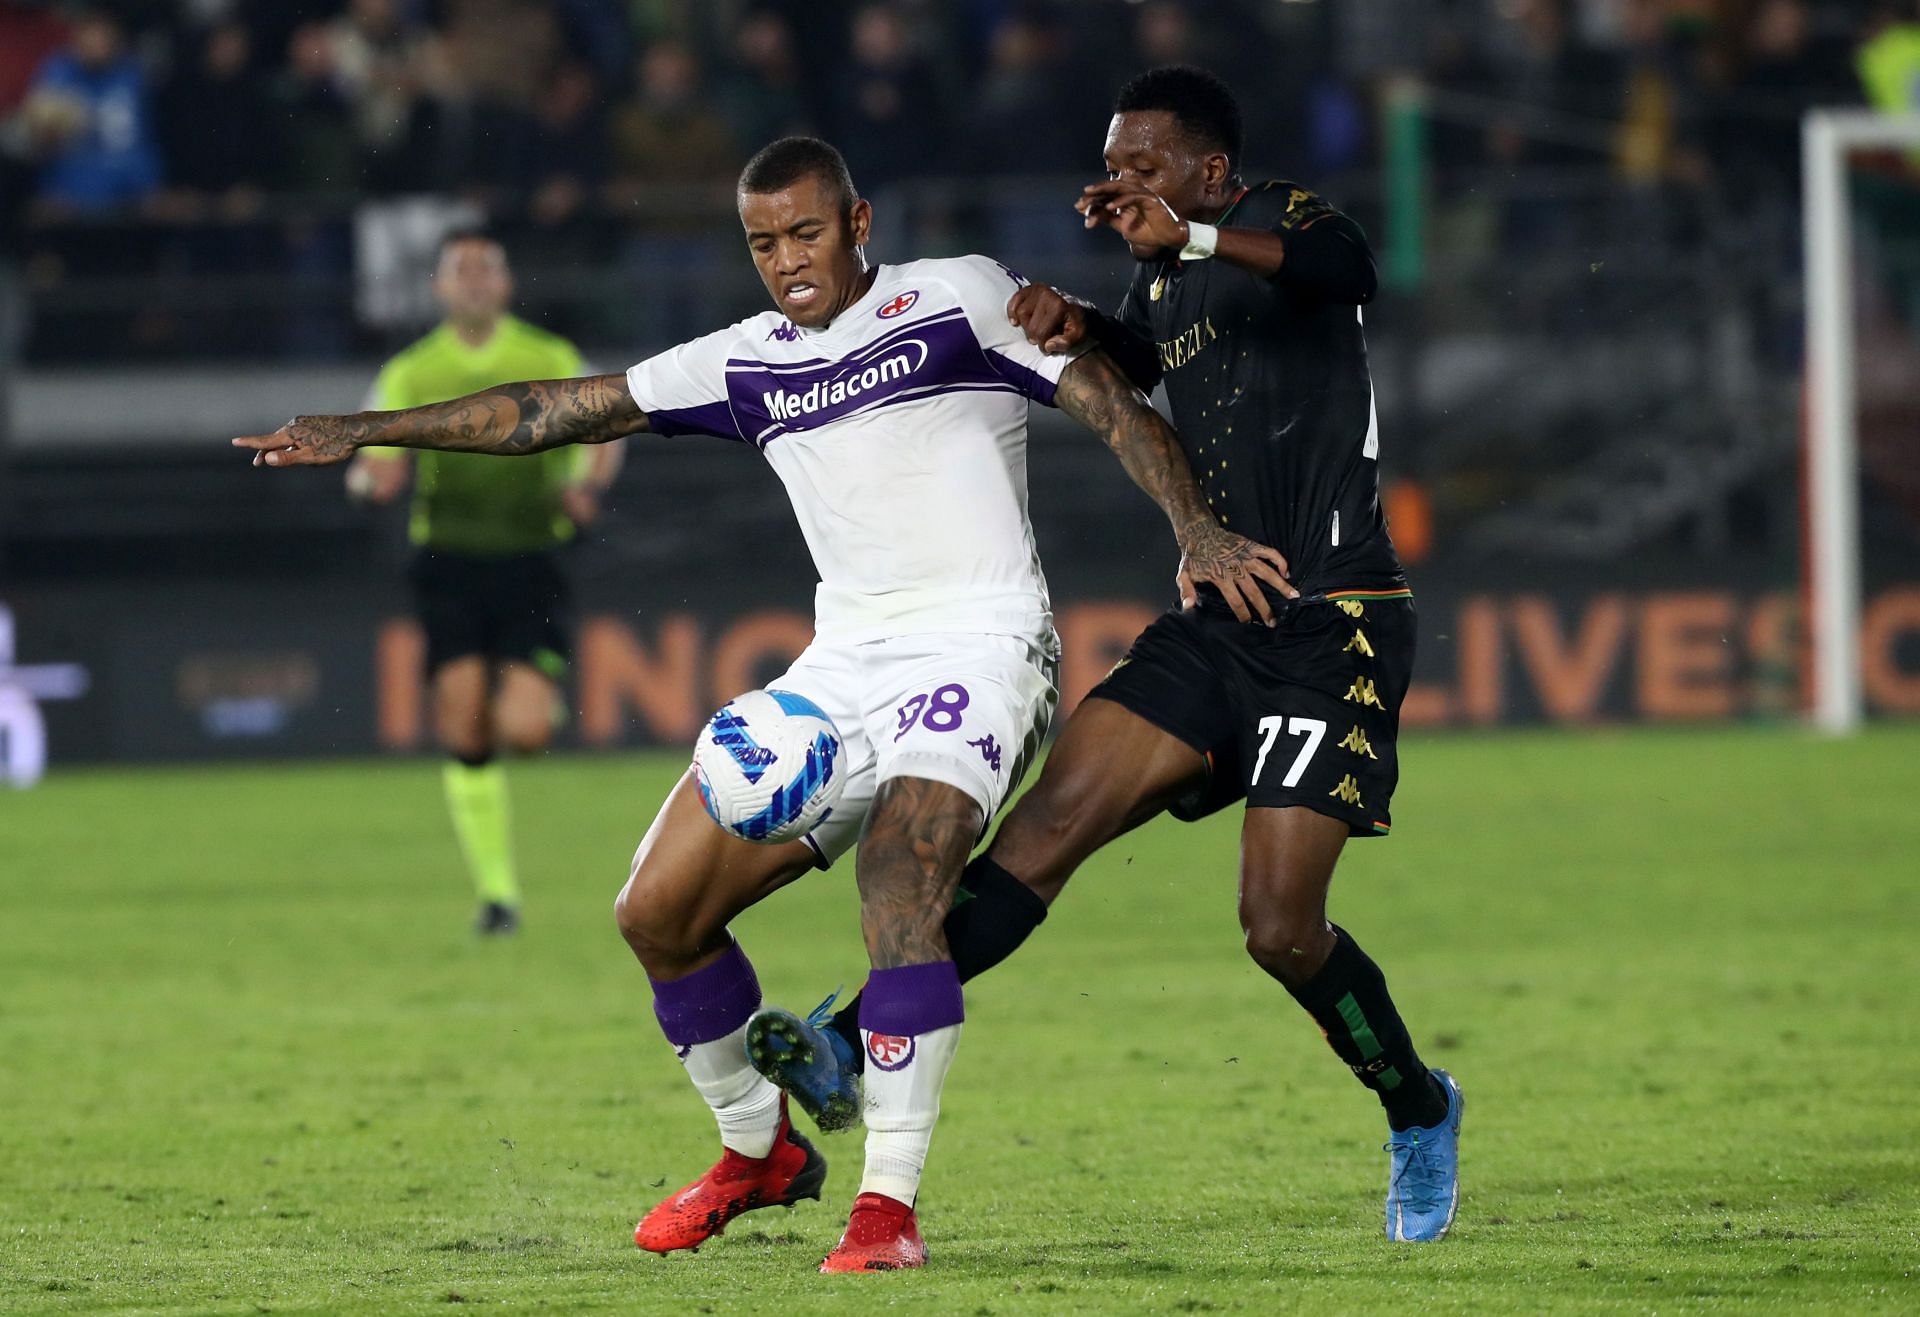 Fiorentina and Venezia lock horns in their upcoming Serie A fixture on Saturday.